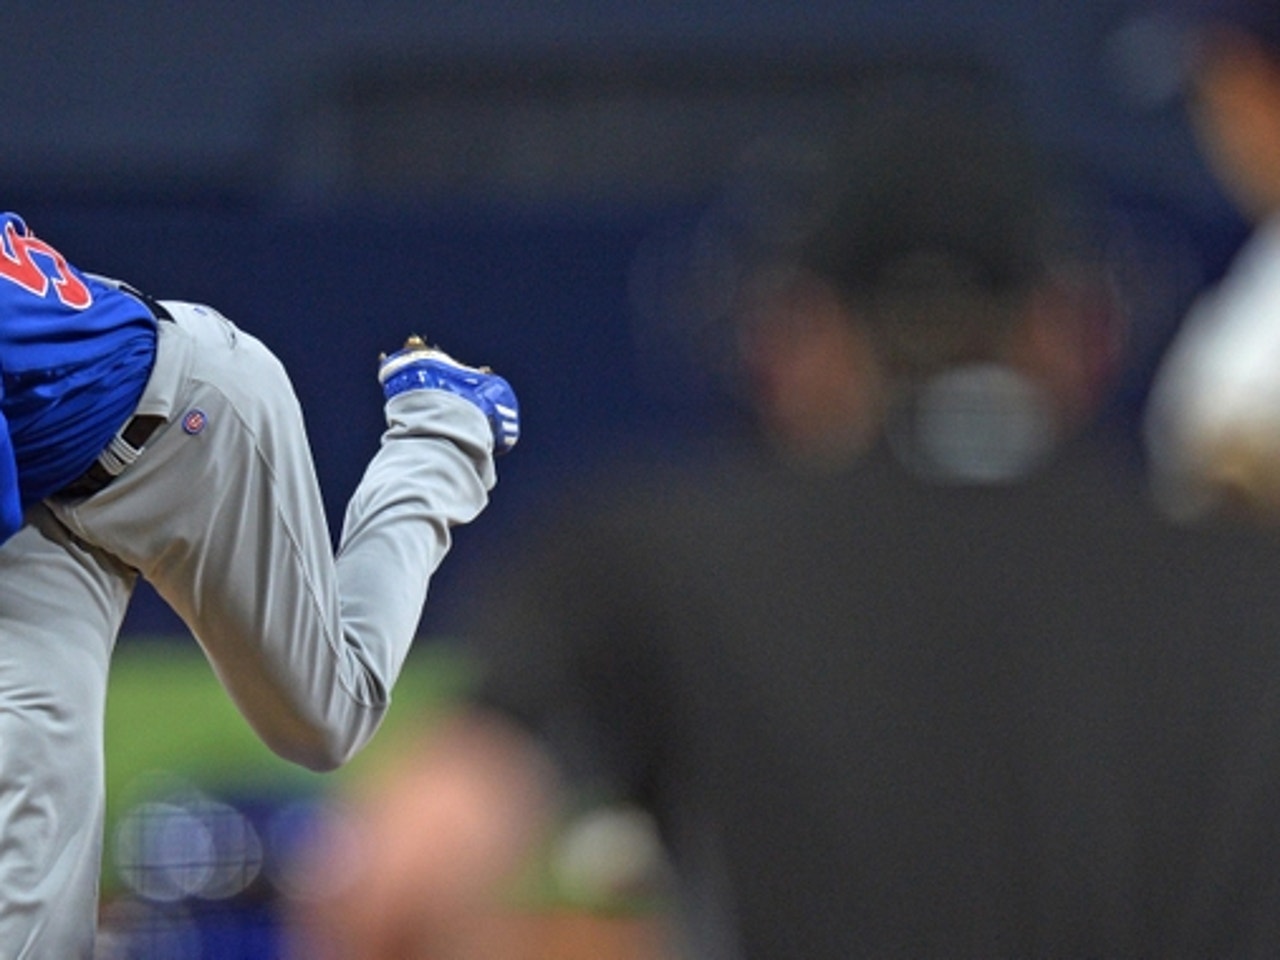 Chicago Cubs: Aroldis Chapman Tries to Overcome Domestic Abuse